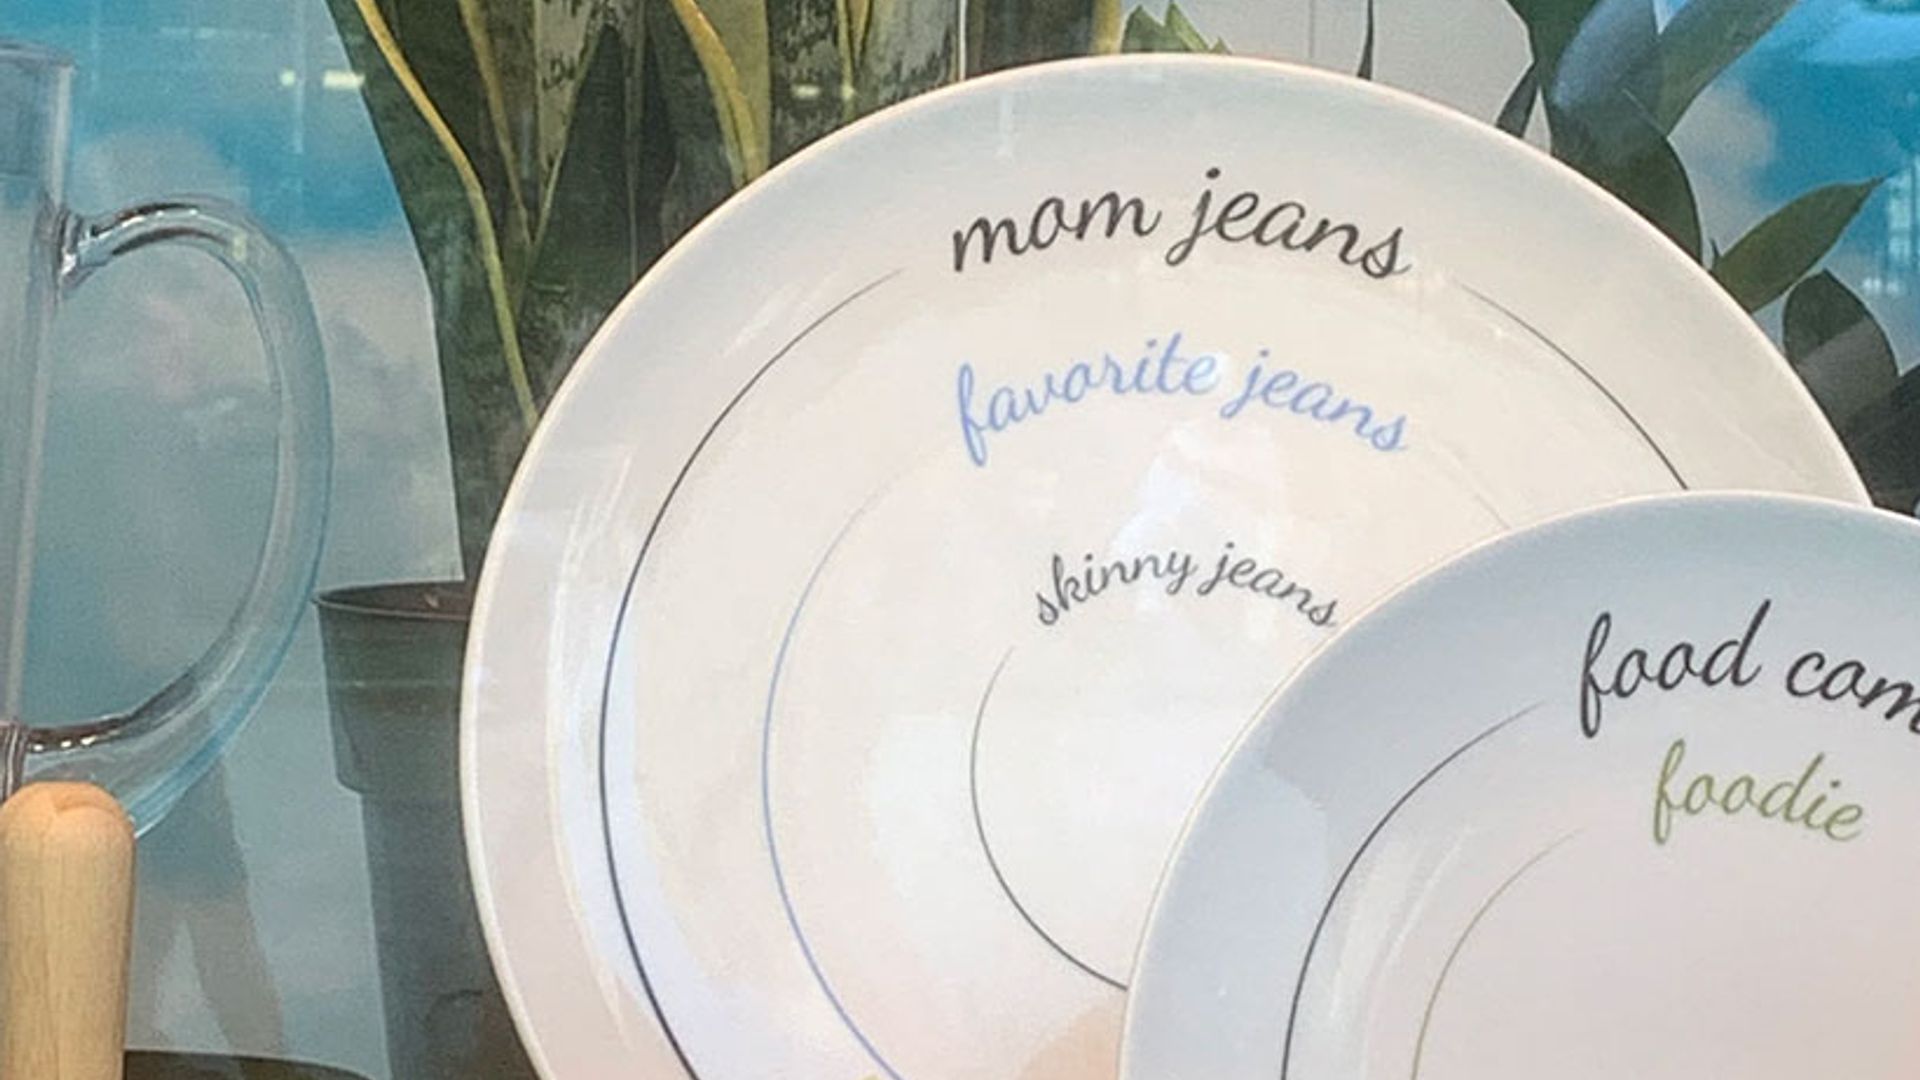 Macy's pulled THESE plates from stores after complaints of body shaming